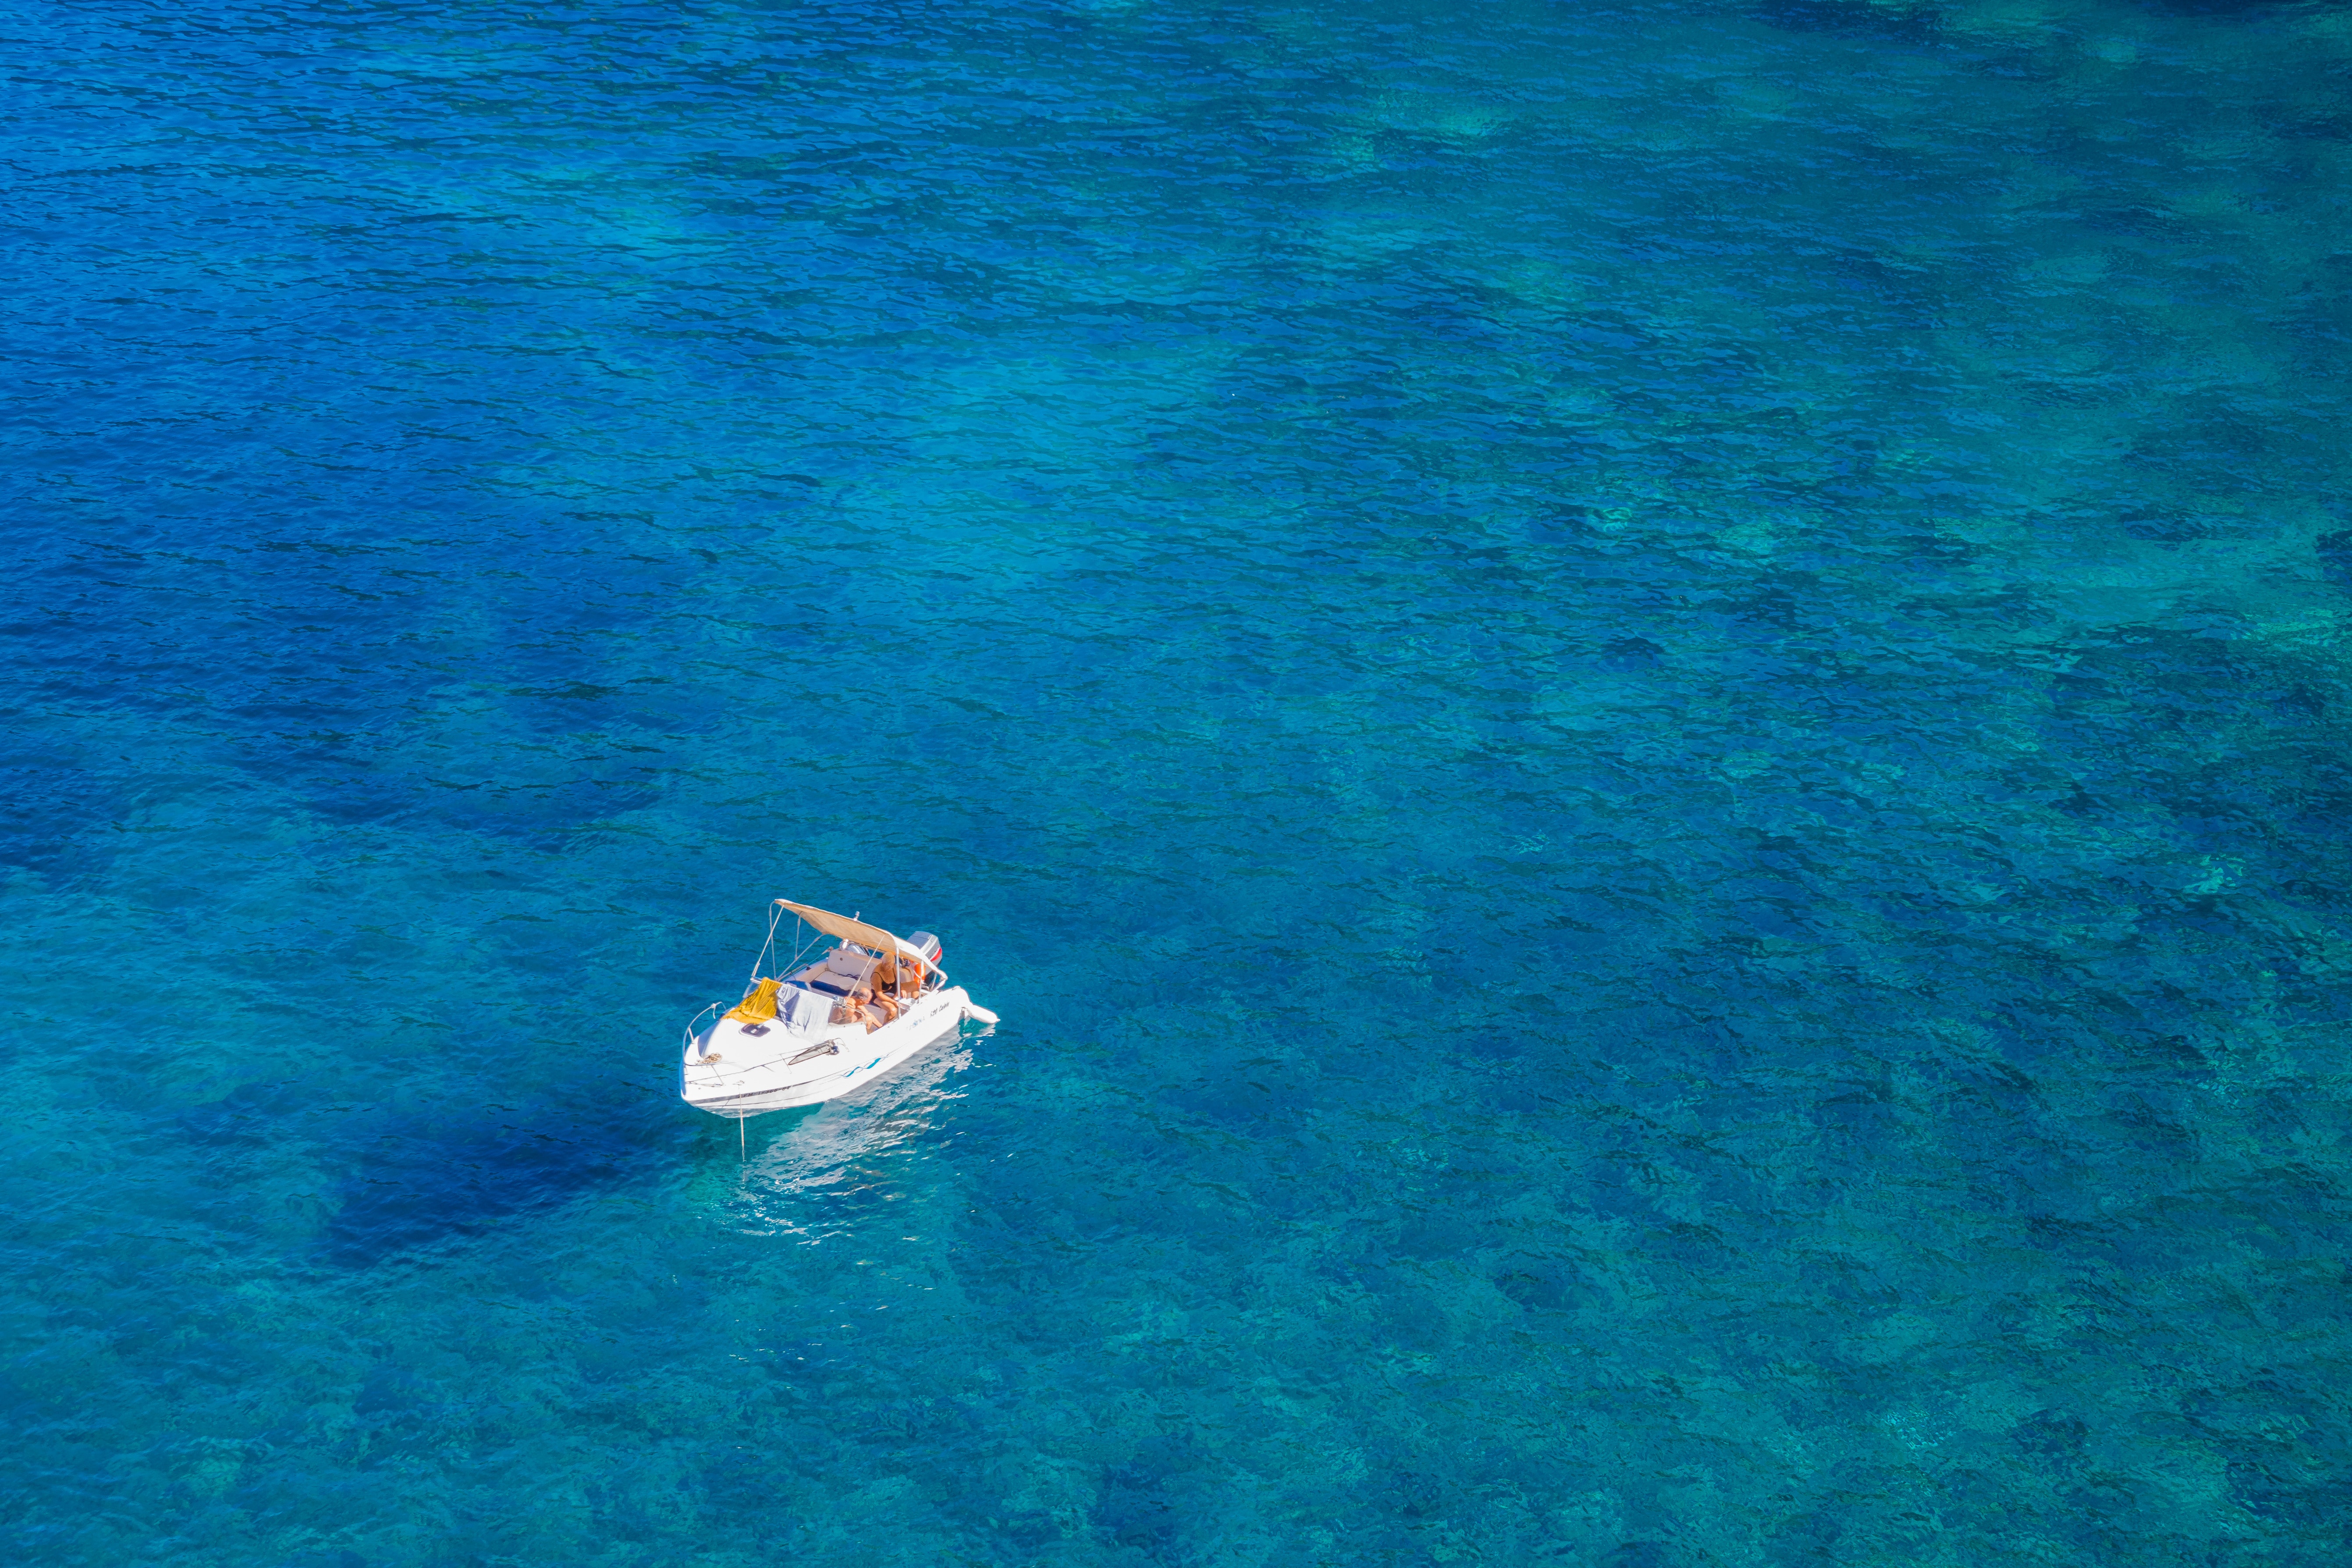 Boat in the middle of the ocean photo